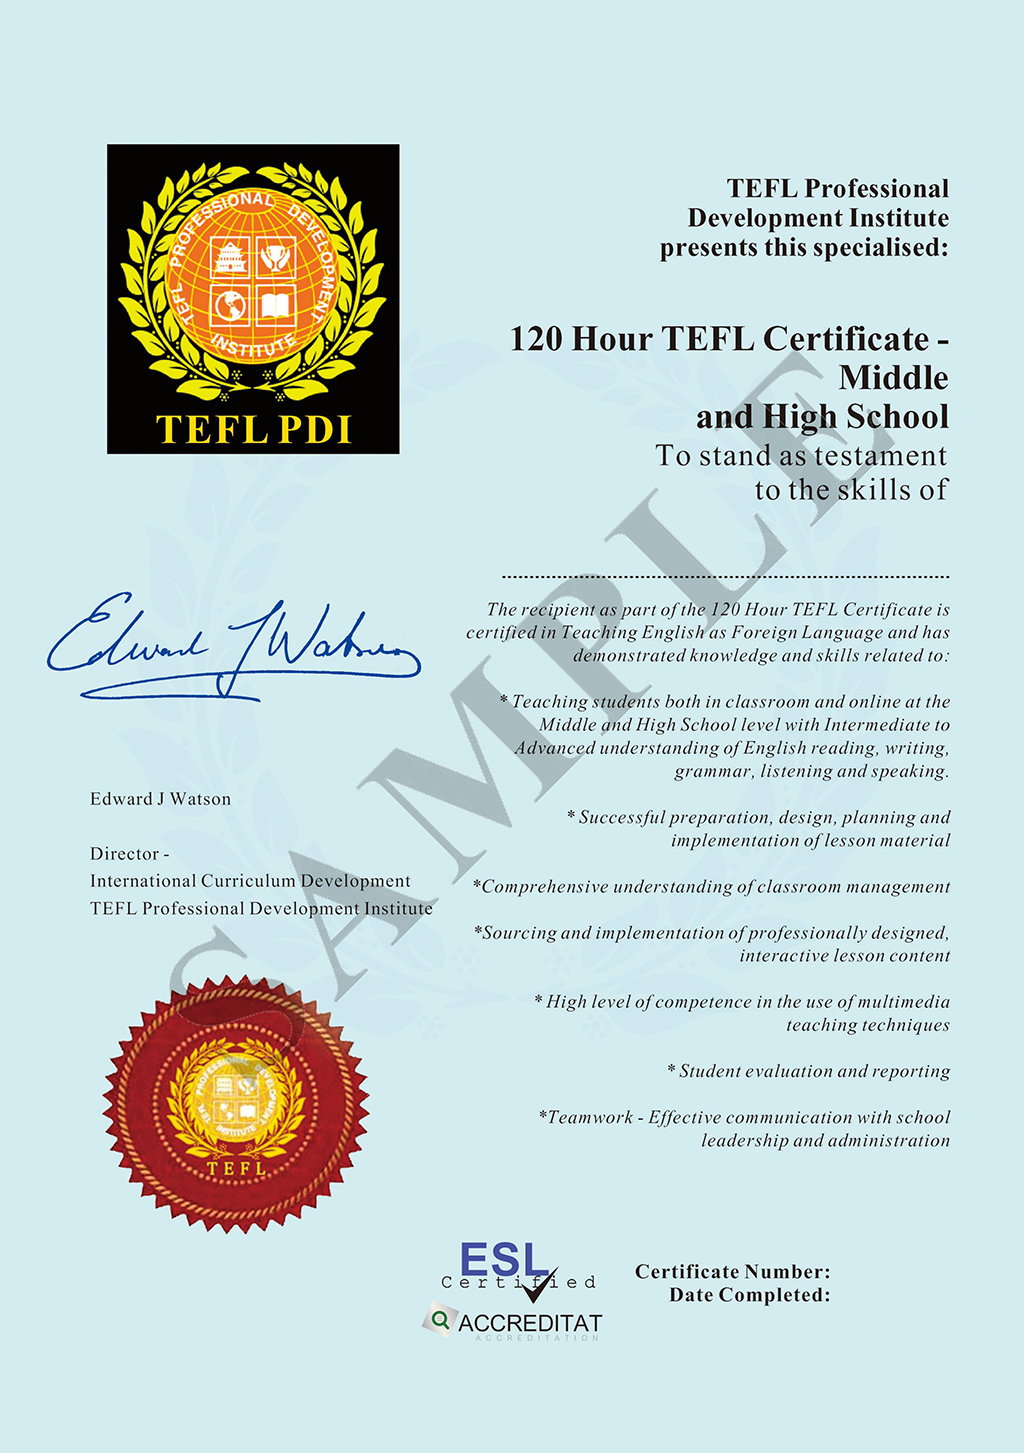 Middle School and High School students level TEFL small